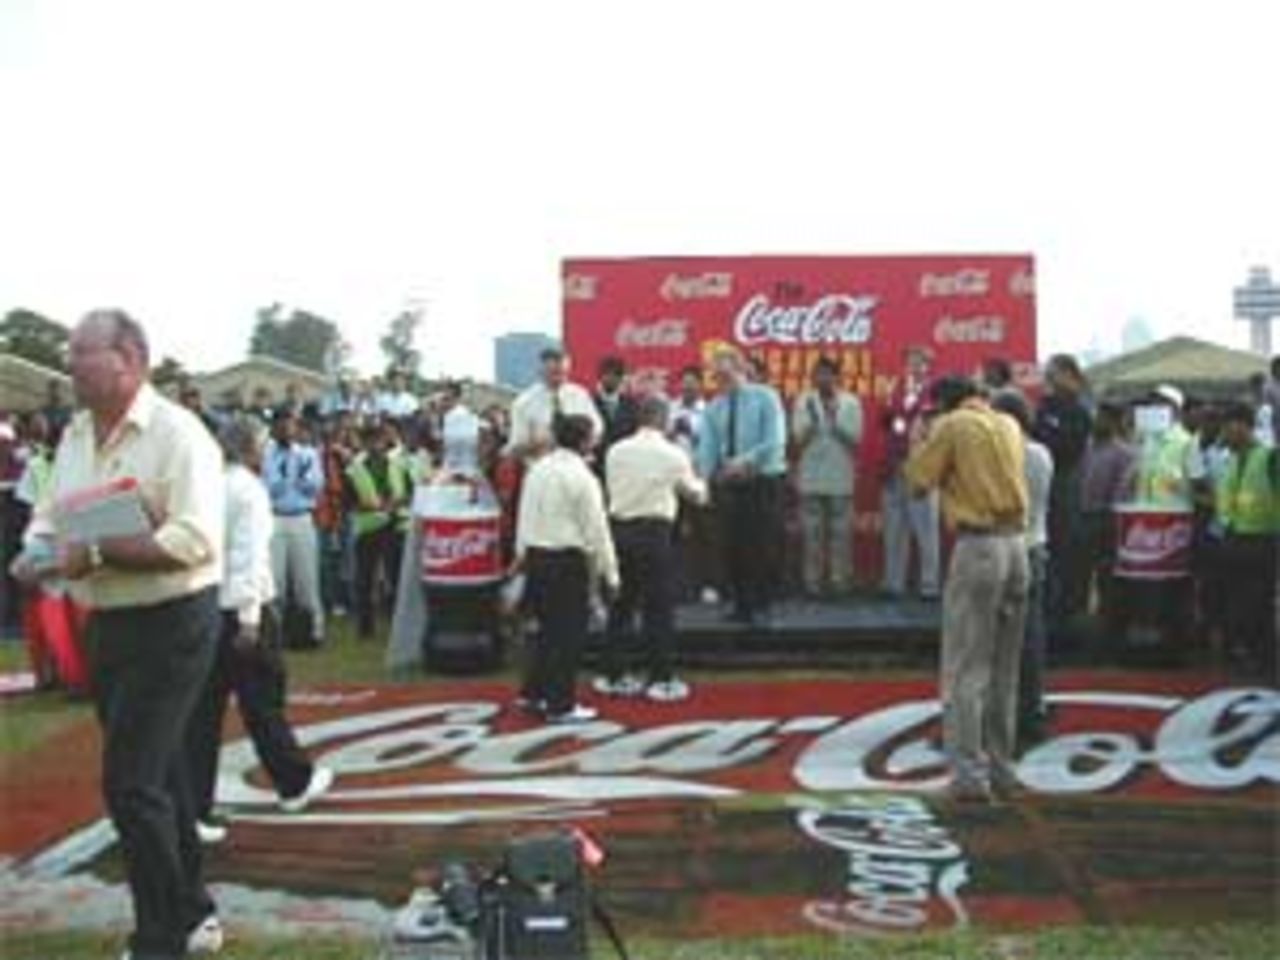 Umpires being recognised for their efforts during the Coca Cola Singapore Challenge Trophy, India v West Indies (Final), Coca-Cola Singapore Challenge, 1999-2000, Kallang Ground, Singapore, 8 Sep 1999.